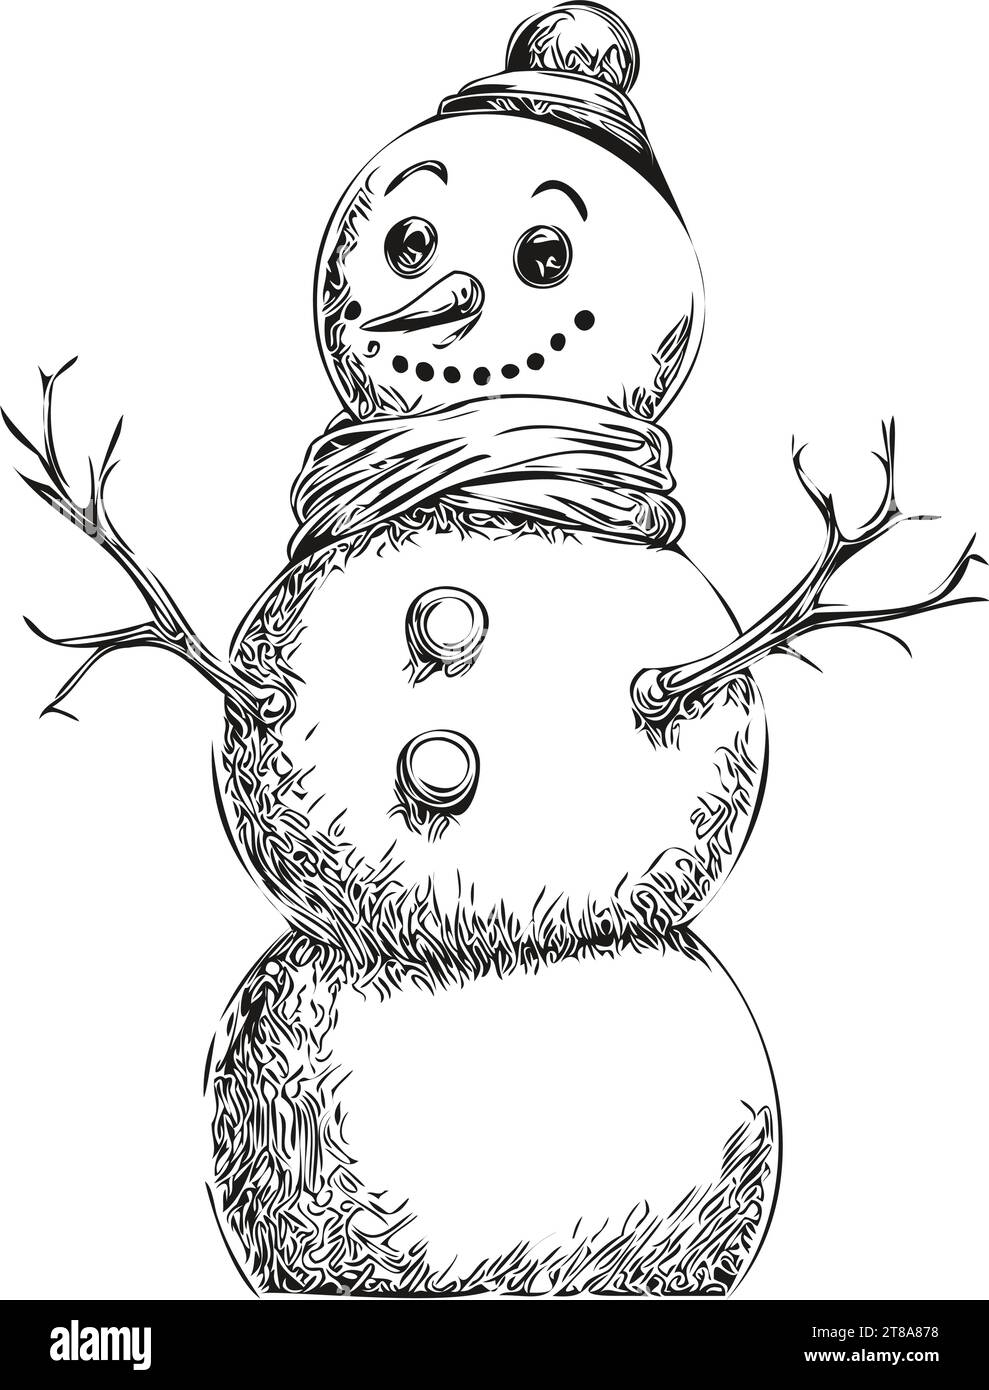 Snowman Sketch in Ink Detailed Hand Drawn Christmas Snowman Illustration with Vintage Style and Seasonal Details, black white isolated Vector ink outl Stock Vector